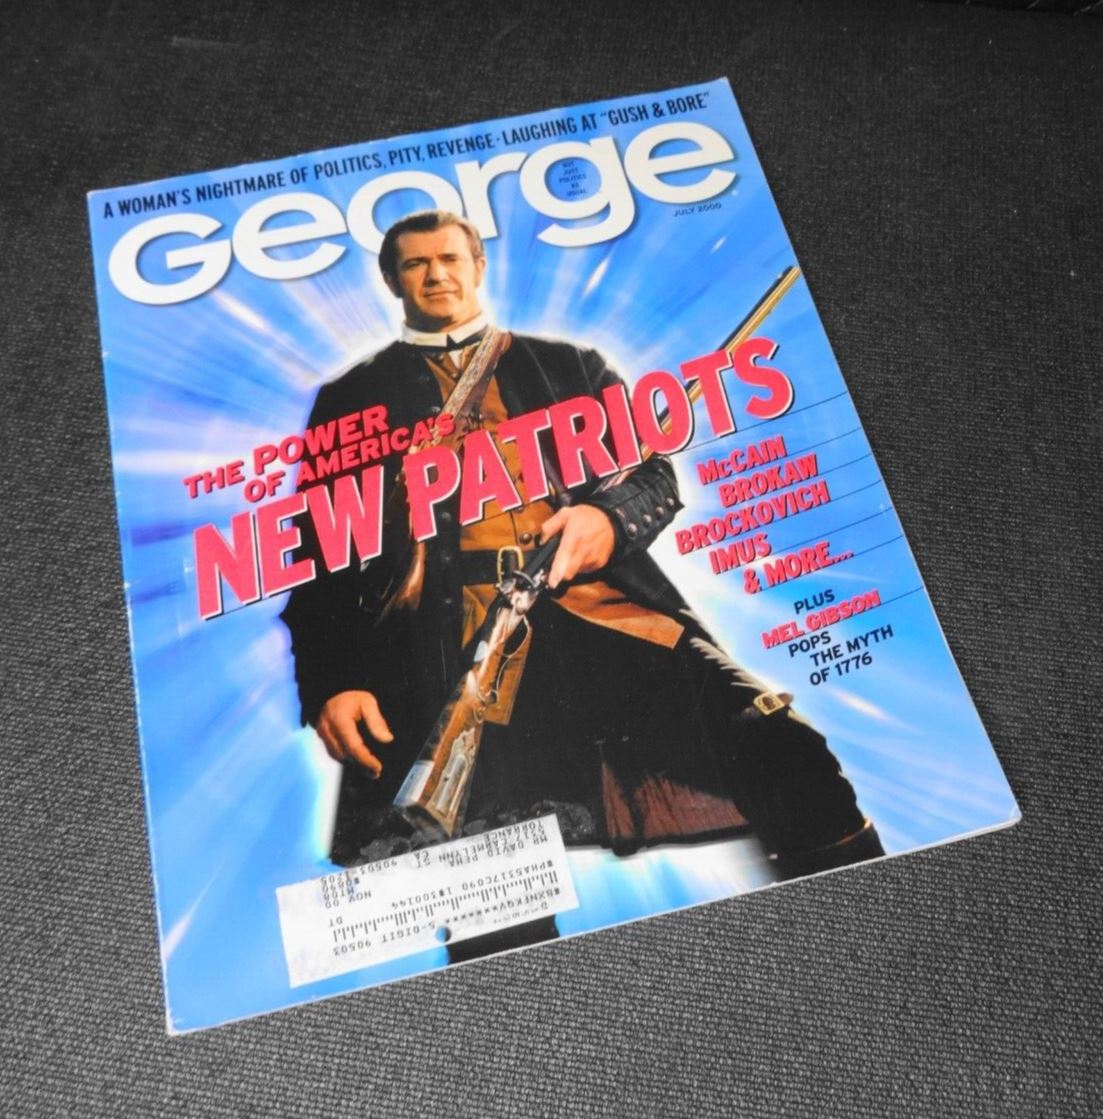 George Magazine July 2000 issue - Mel Gibson on the cover